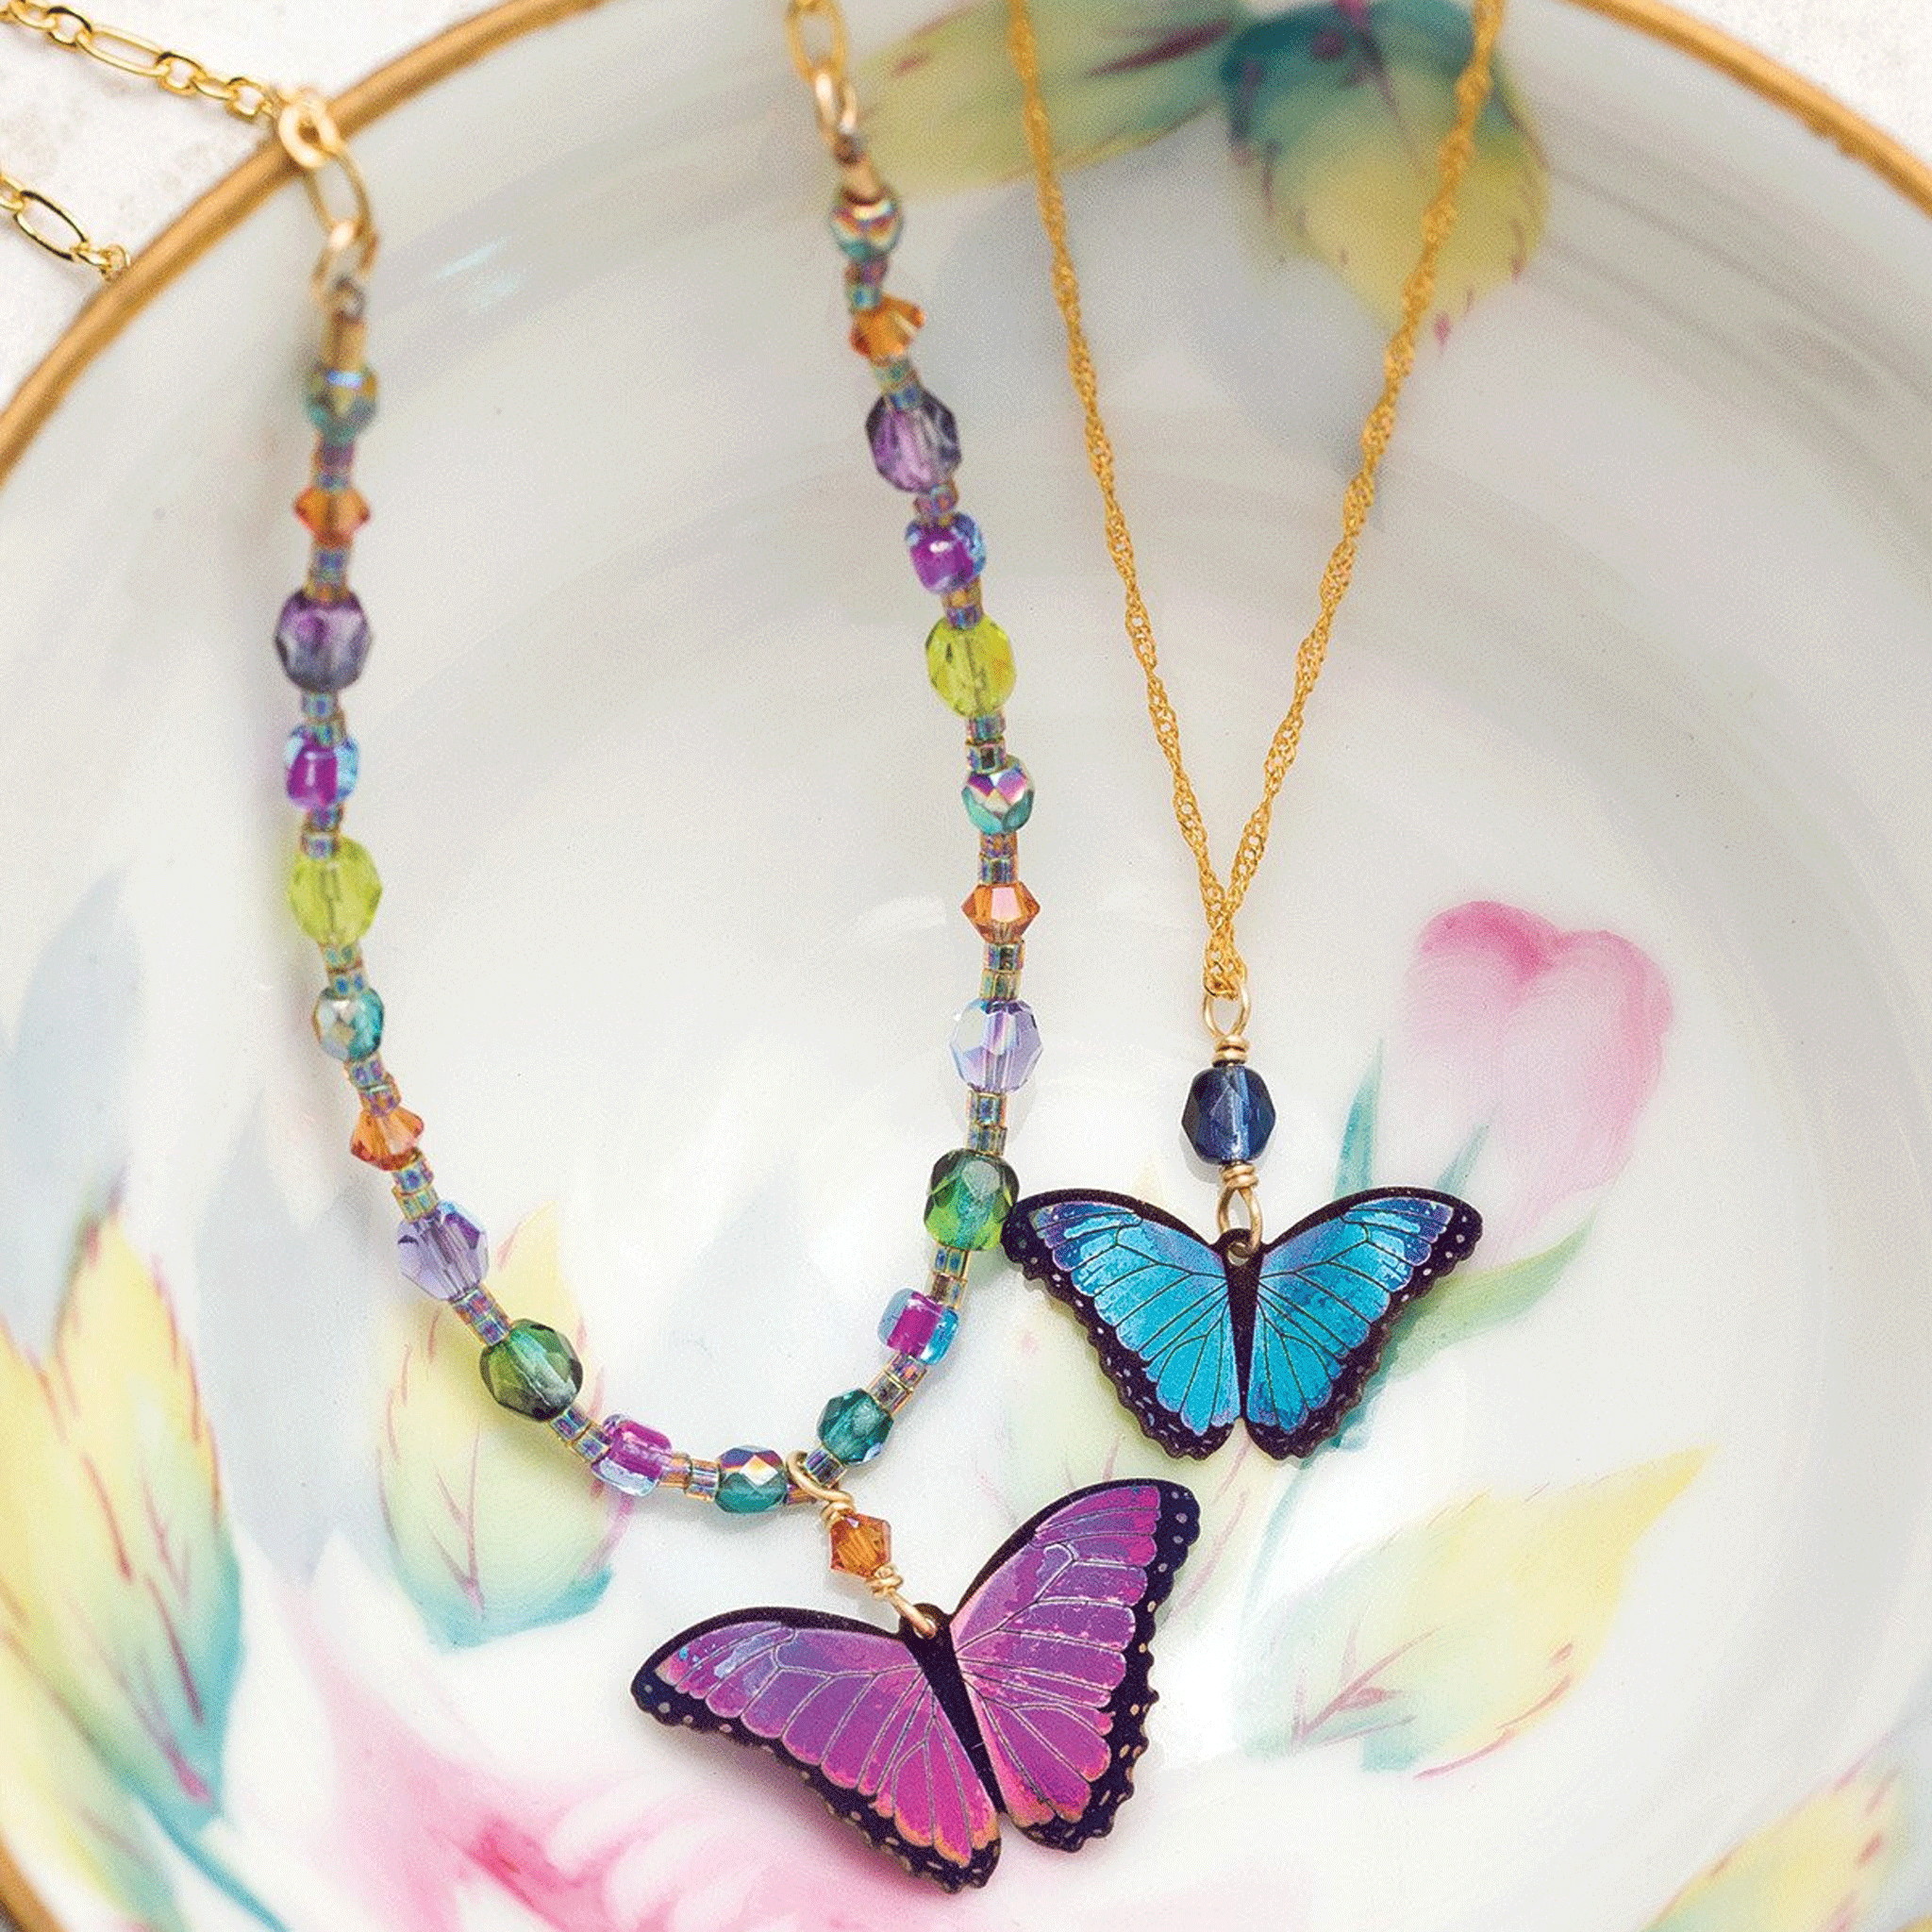 When it comes to Holly Yashi and butterflies, we go together like a wing and a prayer